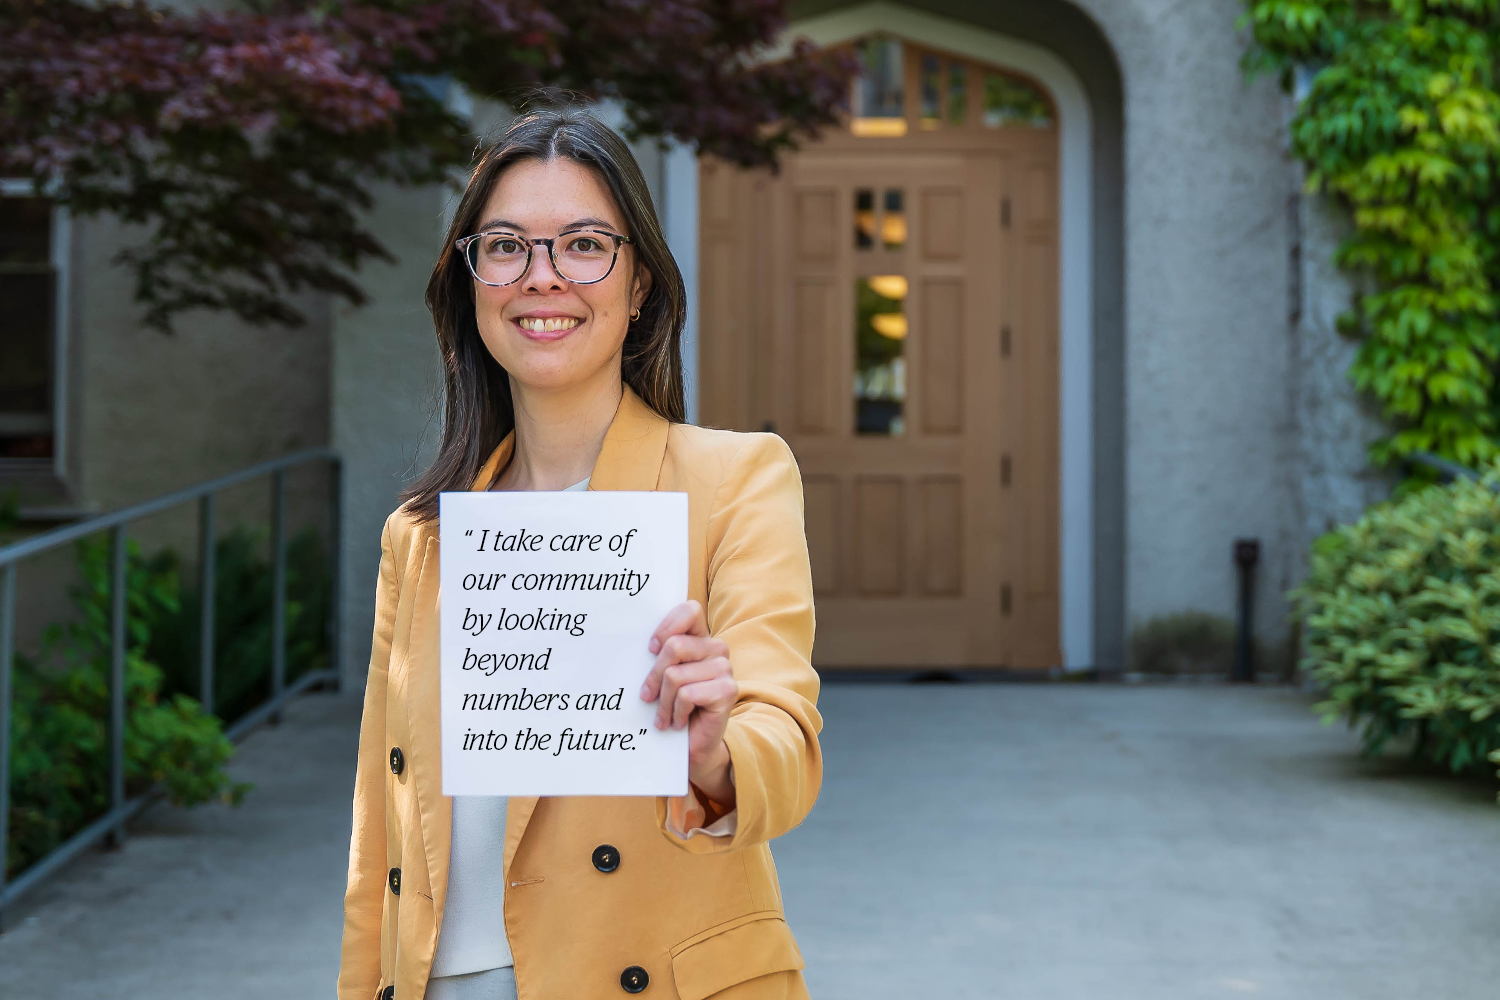 Raffaela stands in front a university building and holds up a white sign that says 'I take care of our community by looking beyond numbers and into the future.'